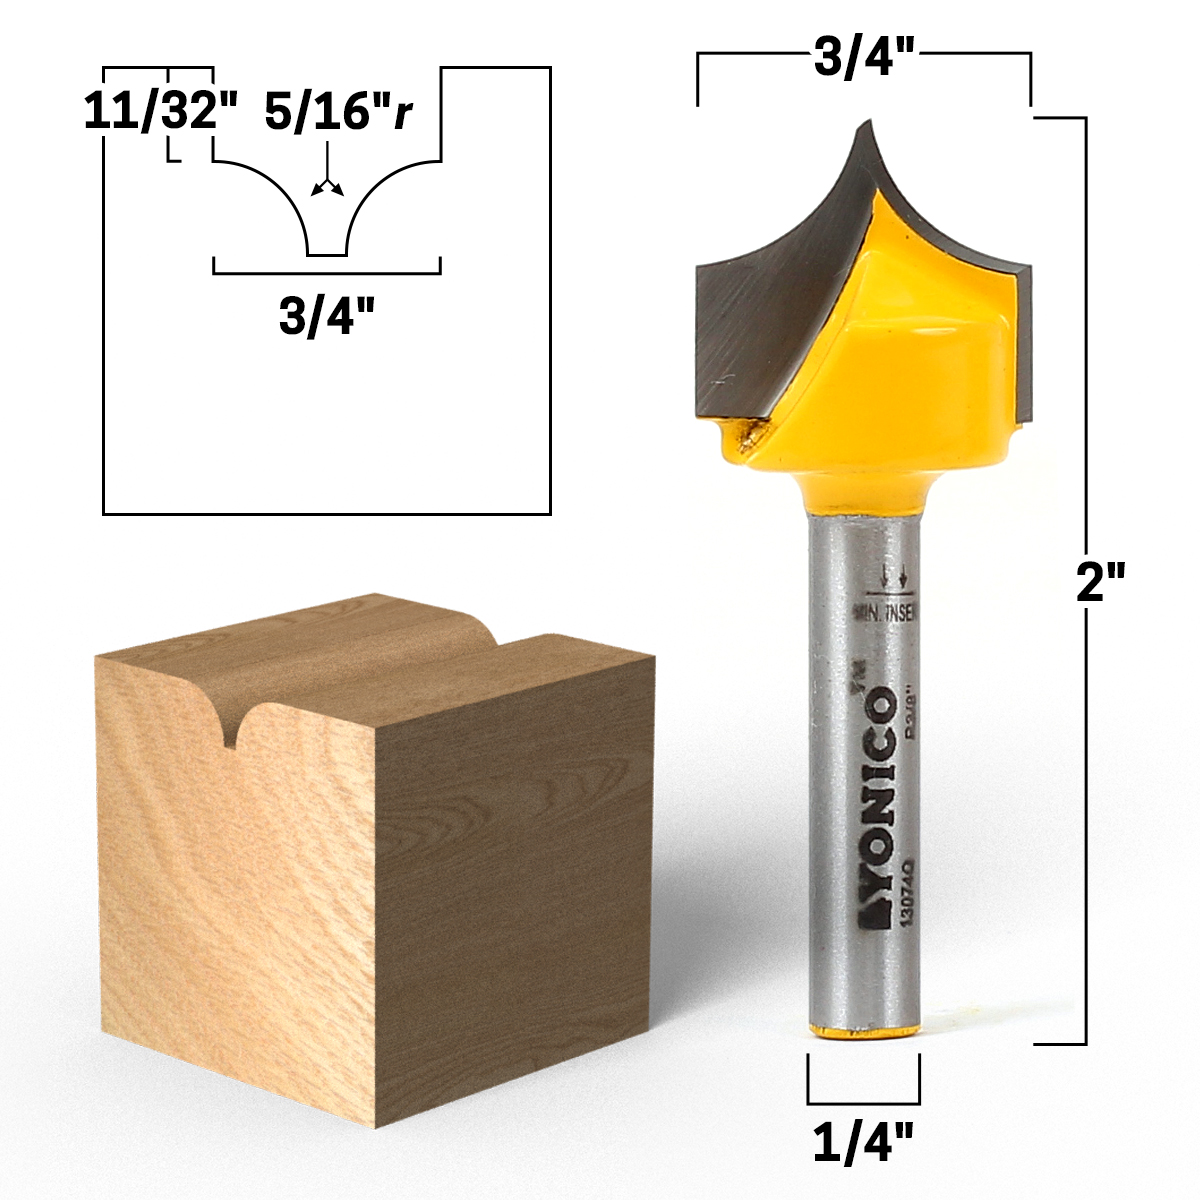 5/16" Radius Point Cutting Round Over Router Bit - 1/4" Shank - Yonico